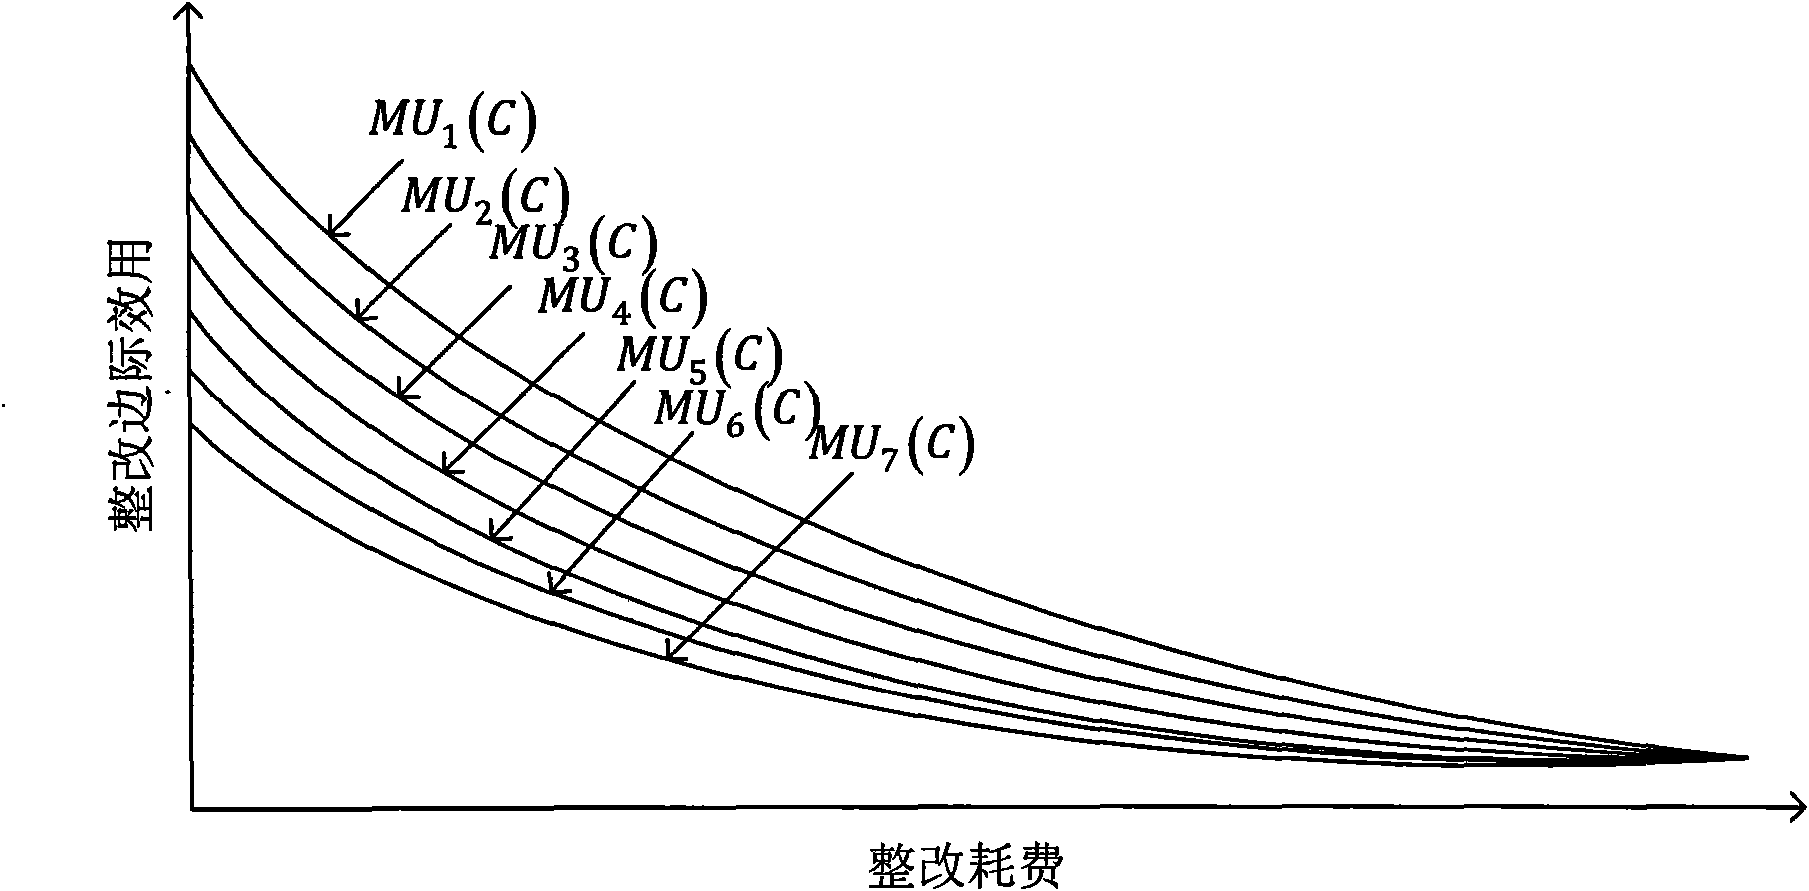 Digital model-based method for optimizing and allocating electromagnetic compatibility indexes